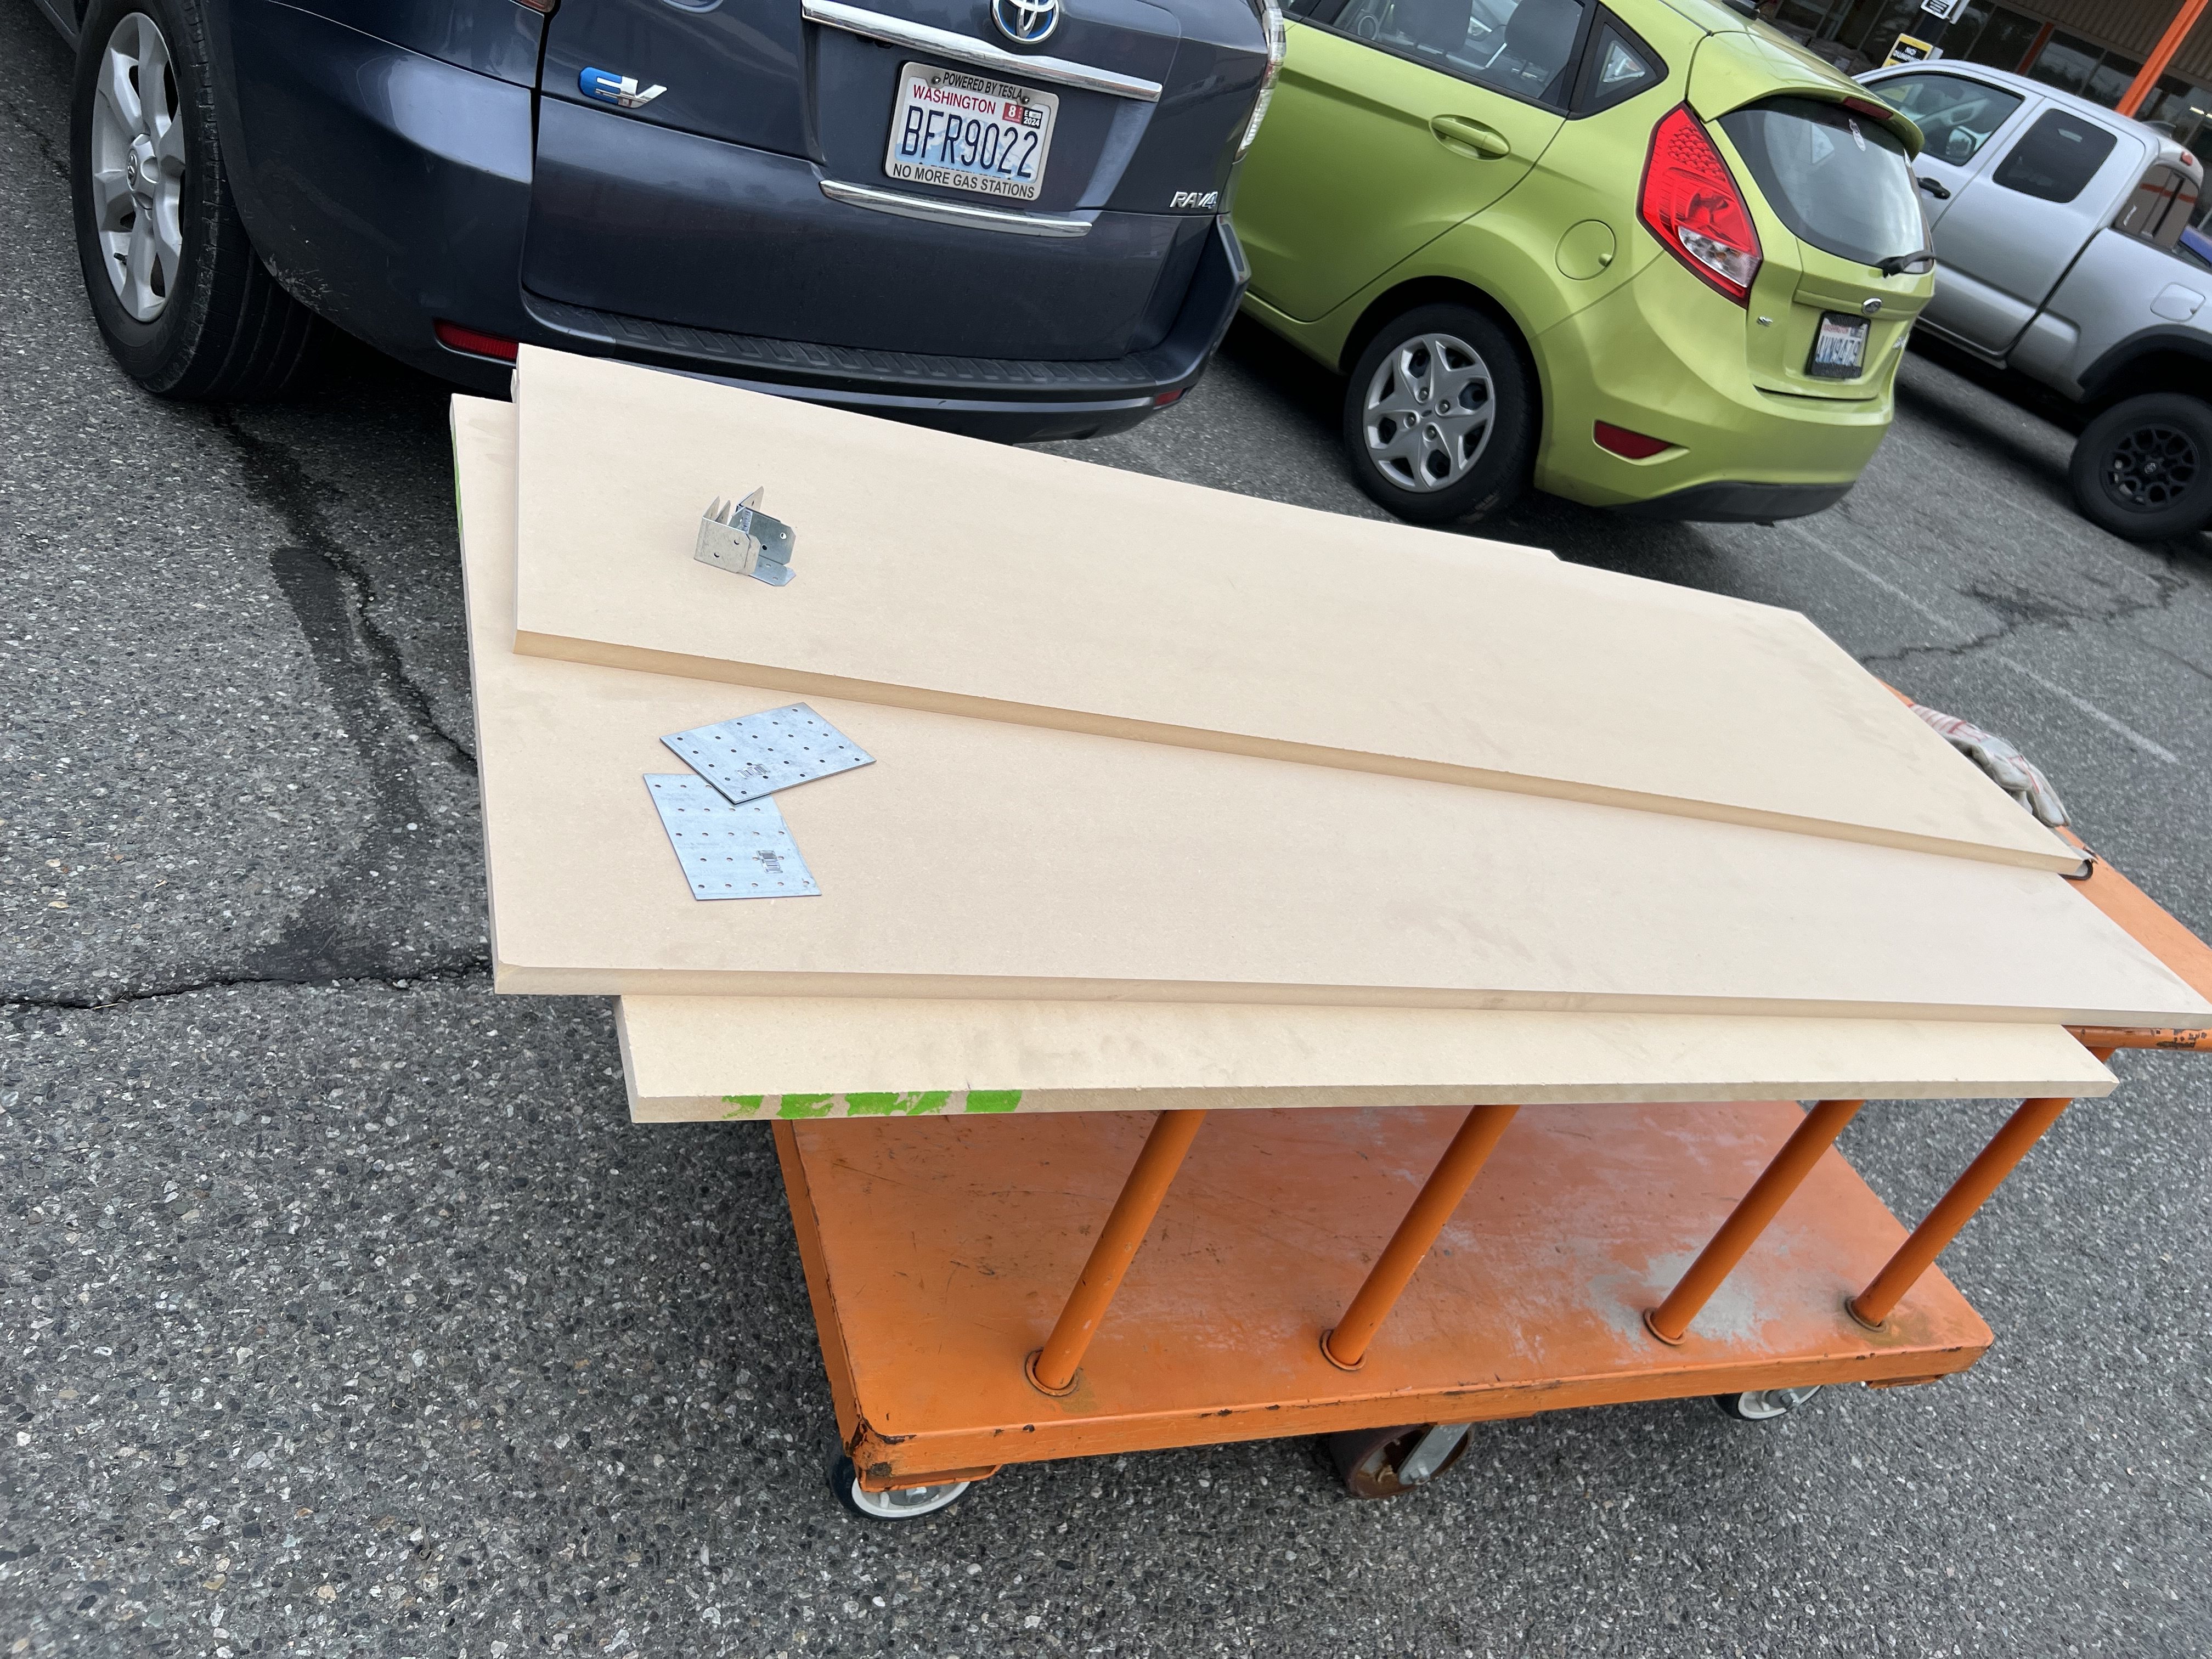 Home Depot parking lot with freshly ripped MDF, $70.